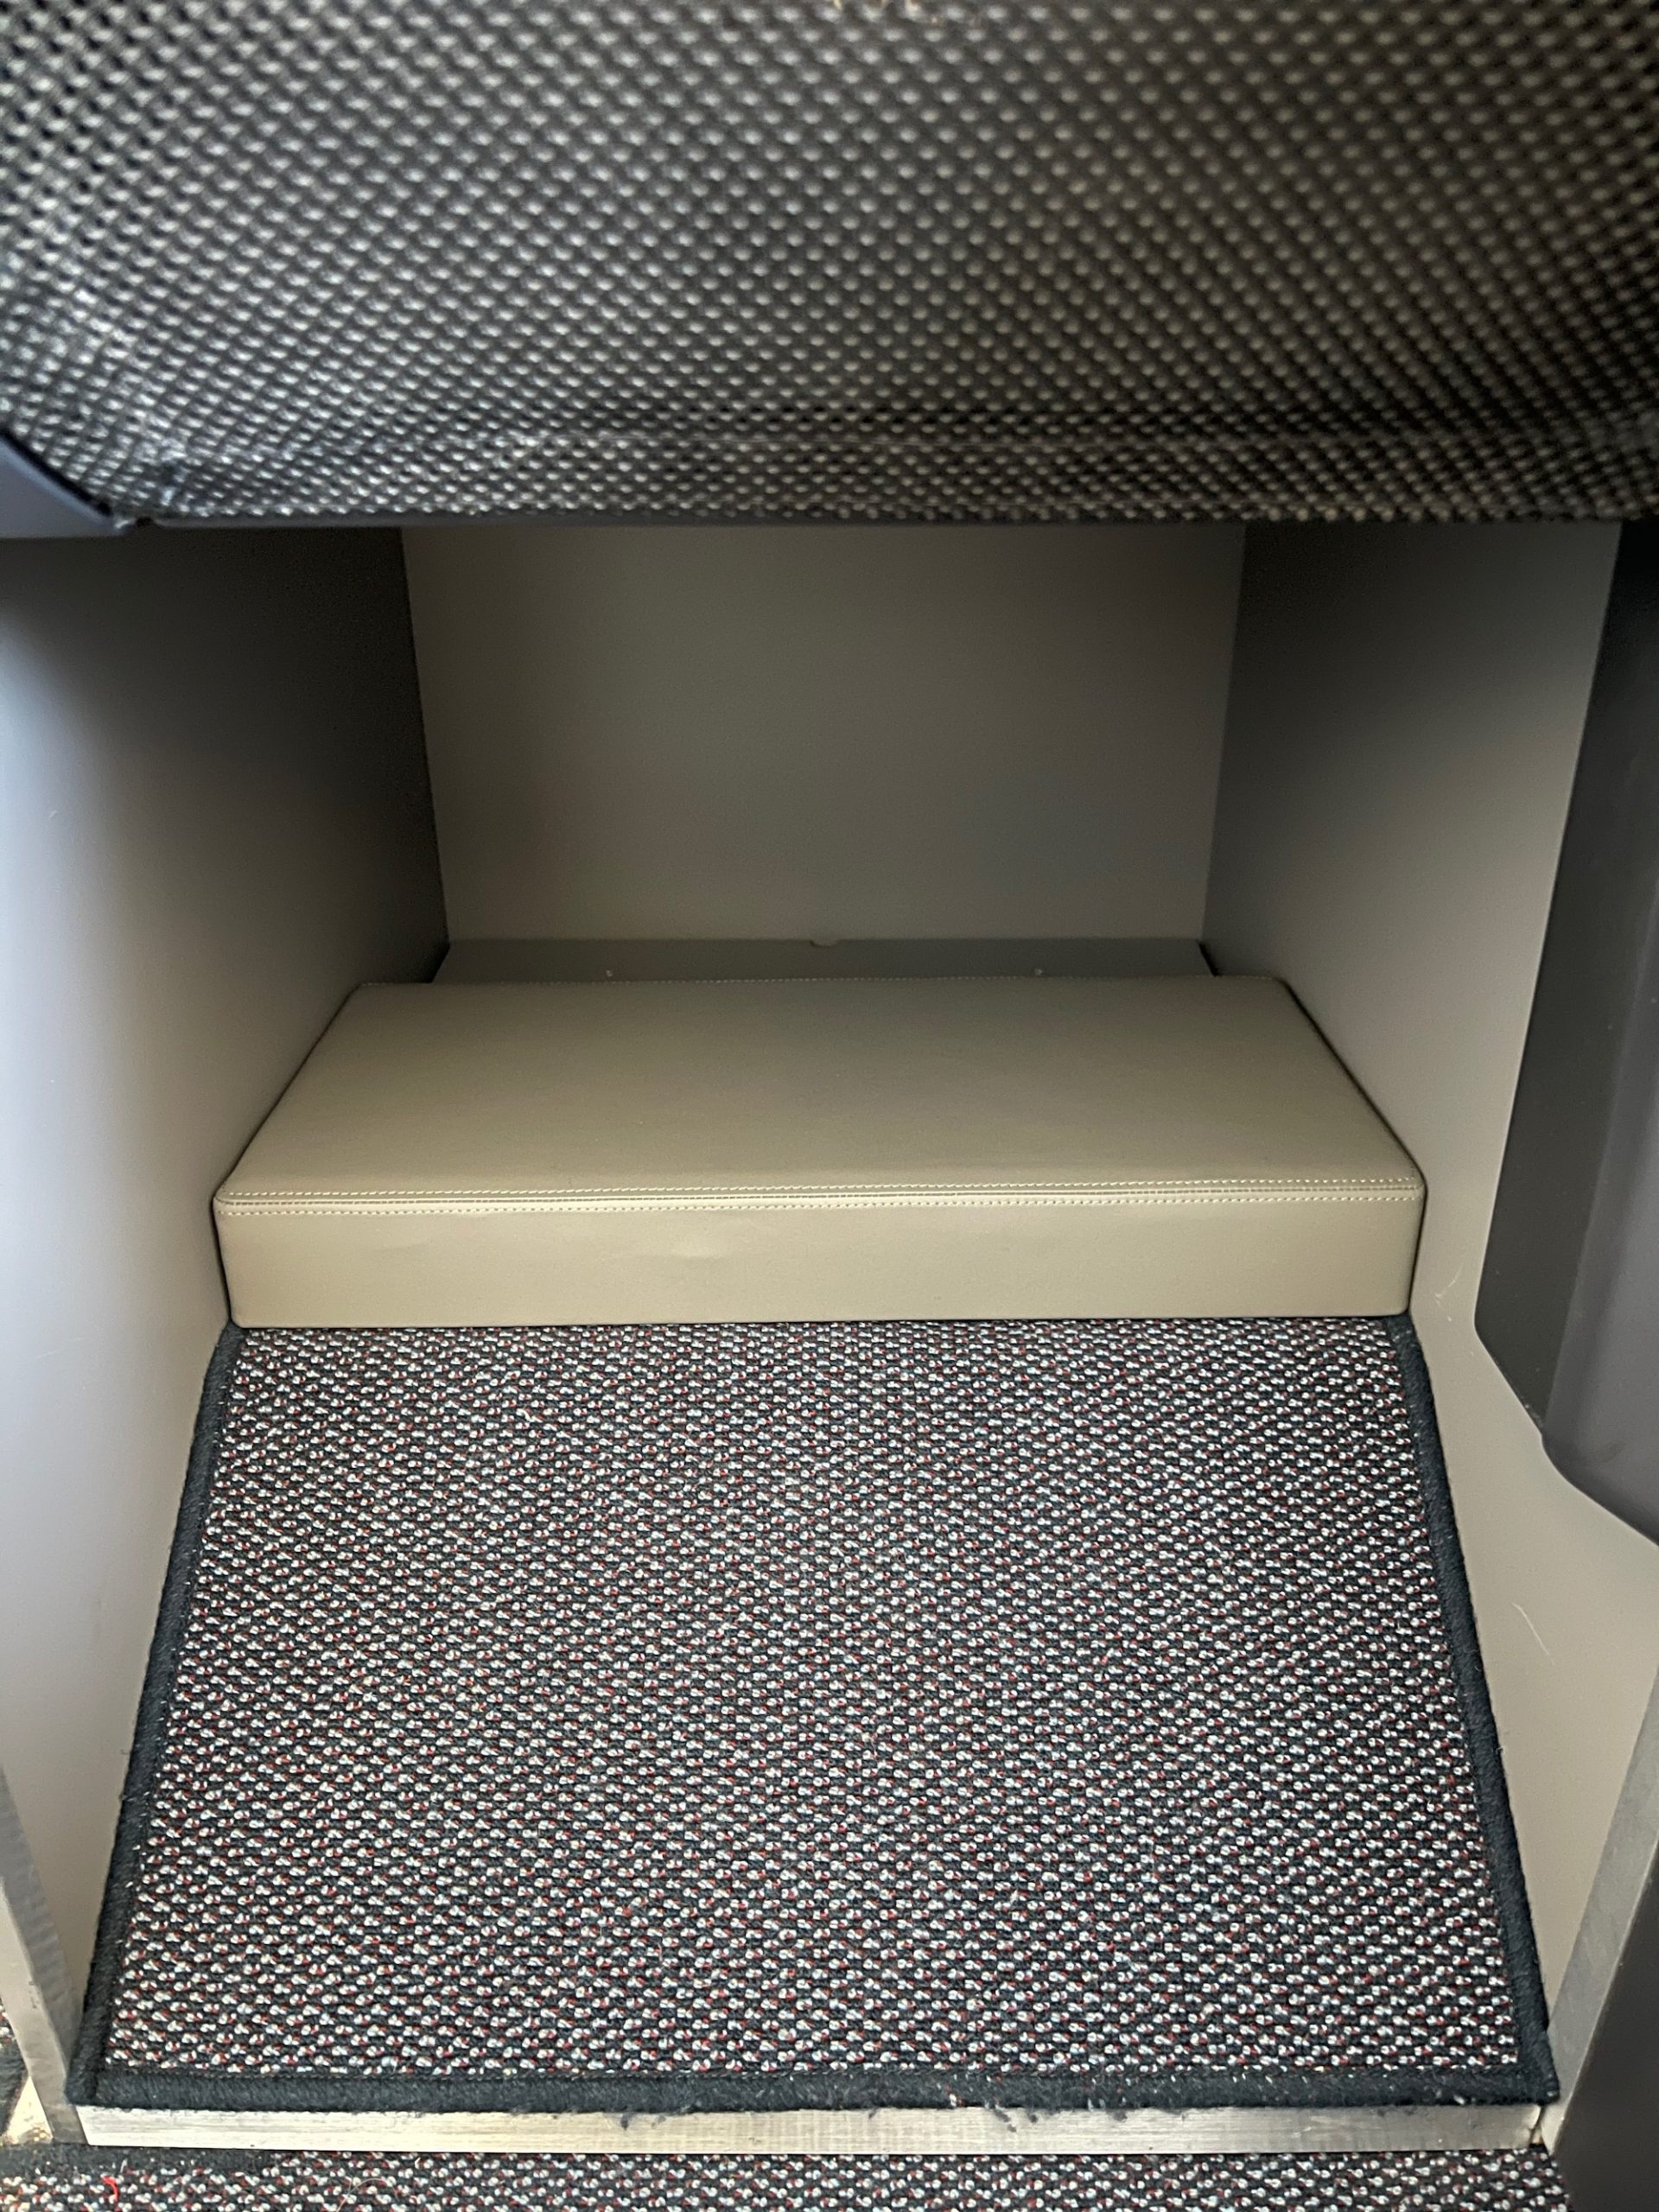 a carpeted floor in a small room